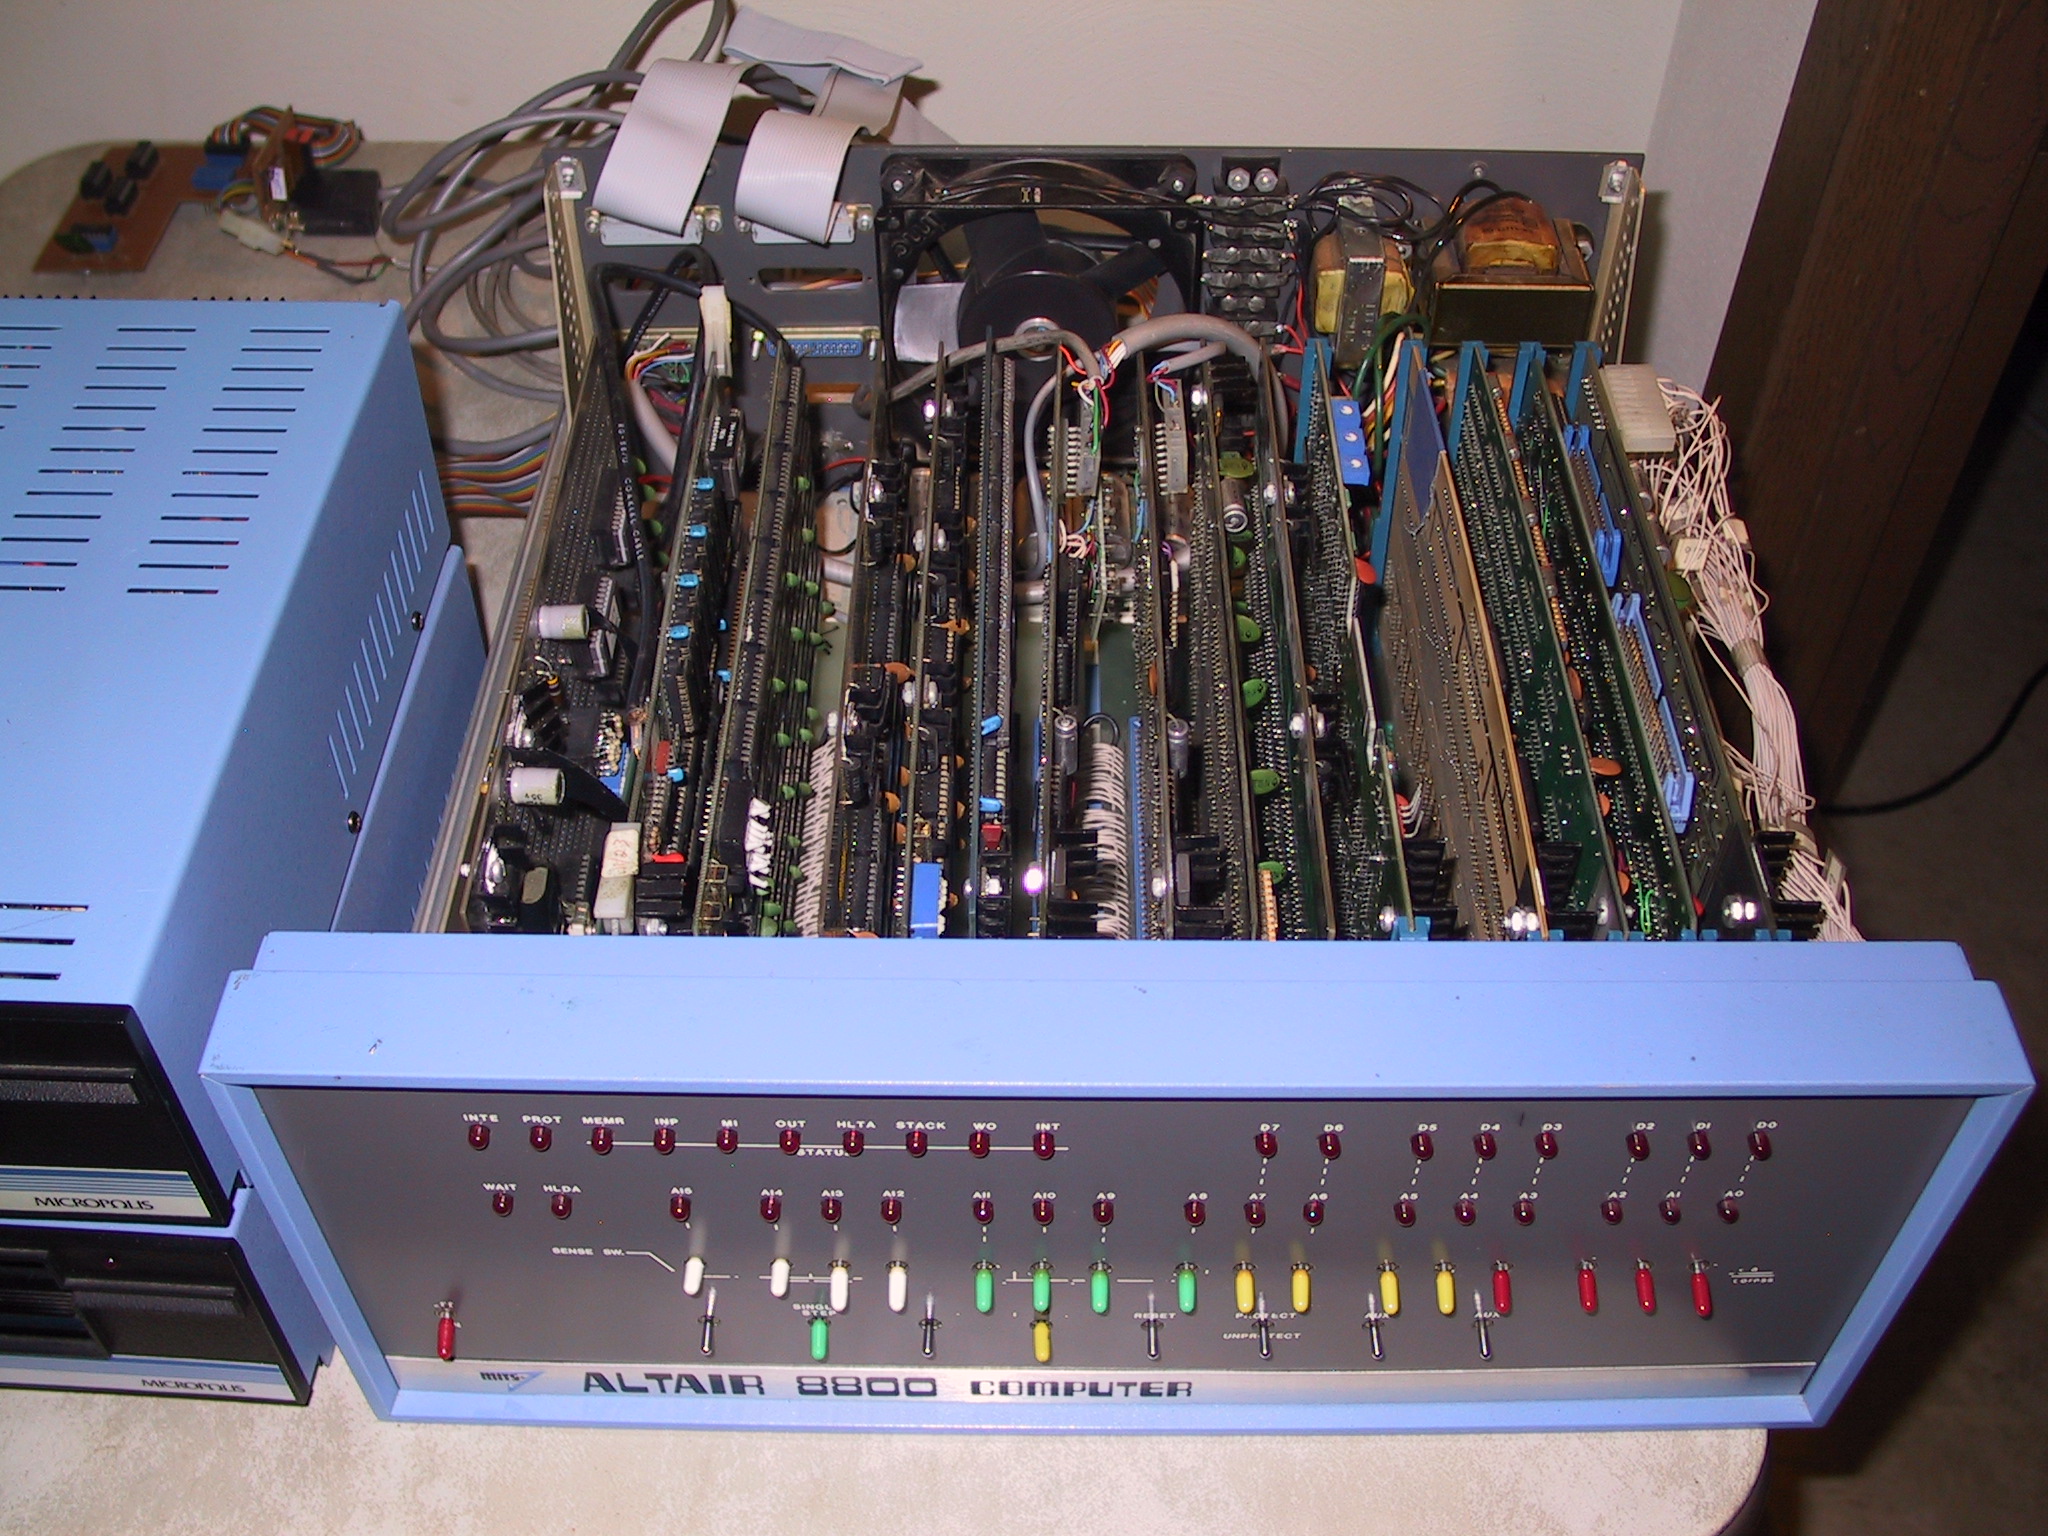 Altair 8080 and Micropolis Floppy Drives